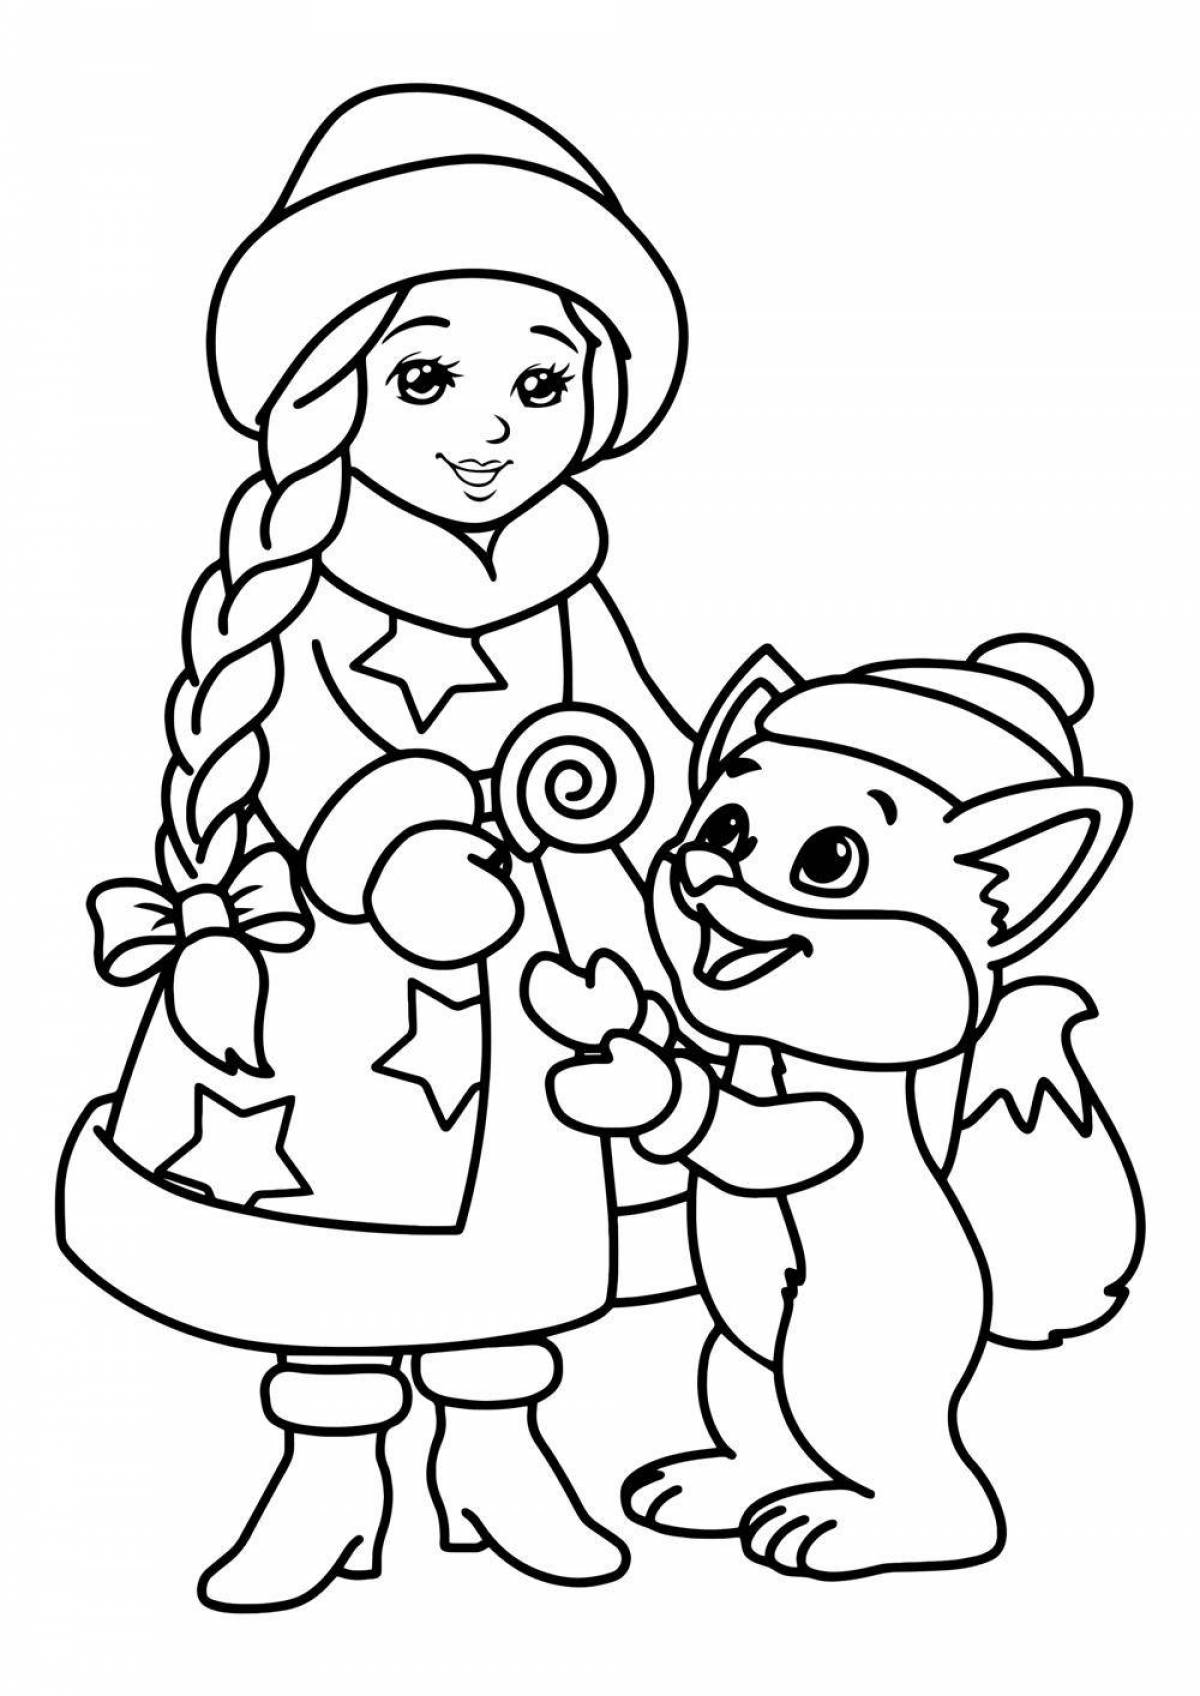 Cute snow maiden coloring book for kids